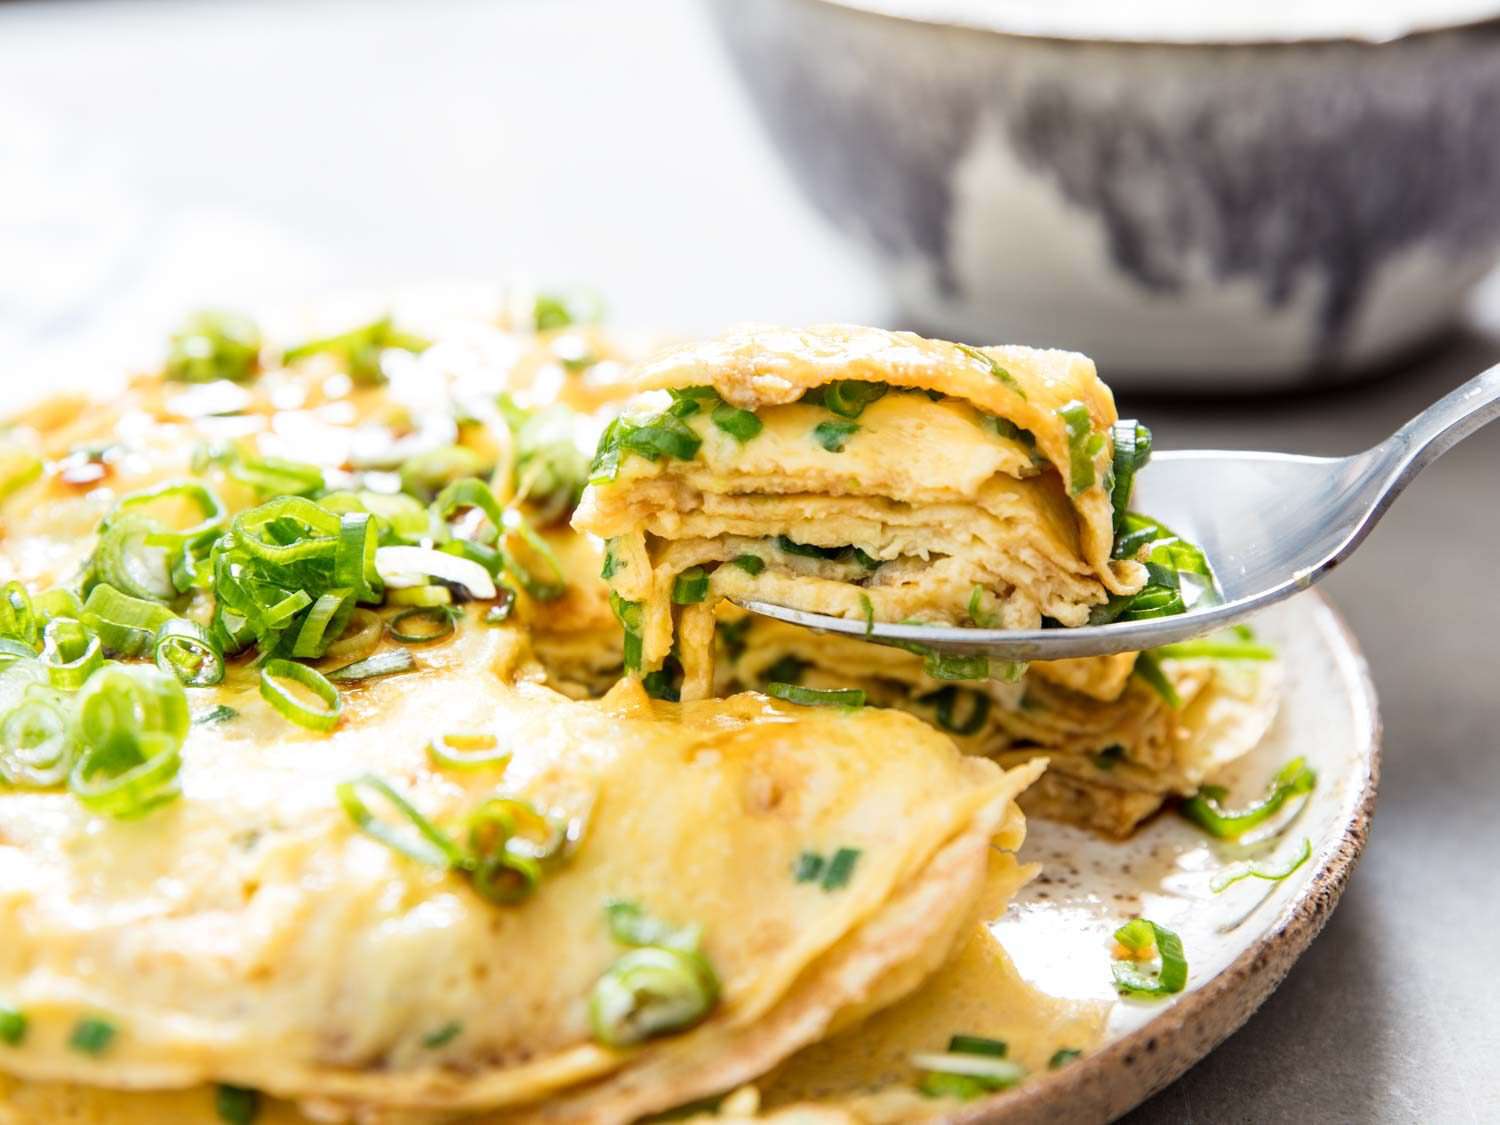 Taking a bite with a fork of a layered omelette topped with scallions.